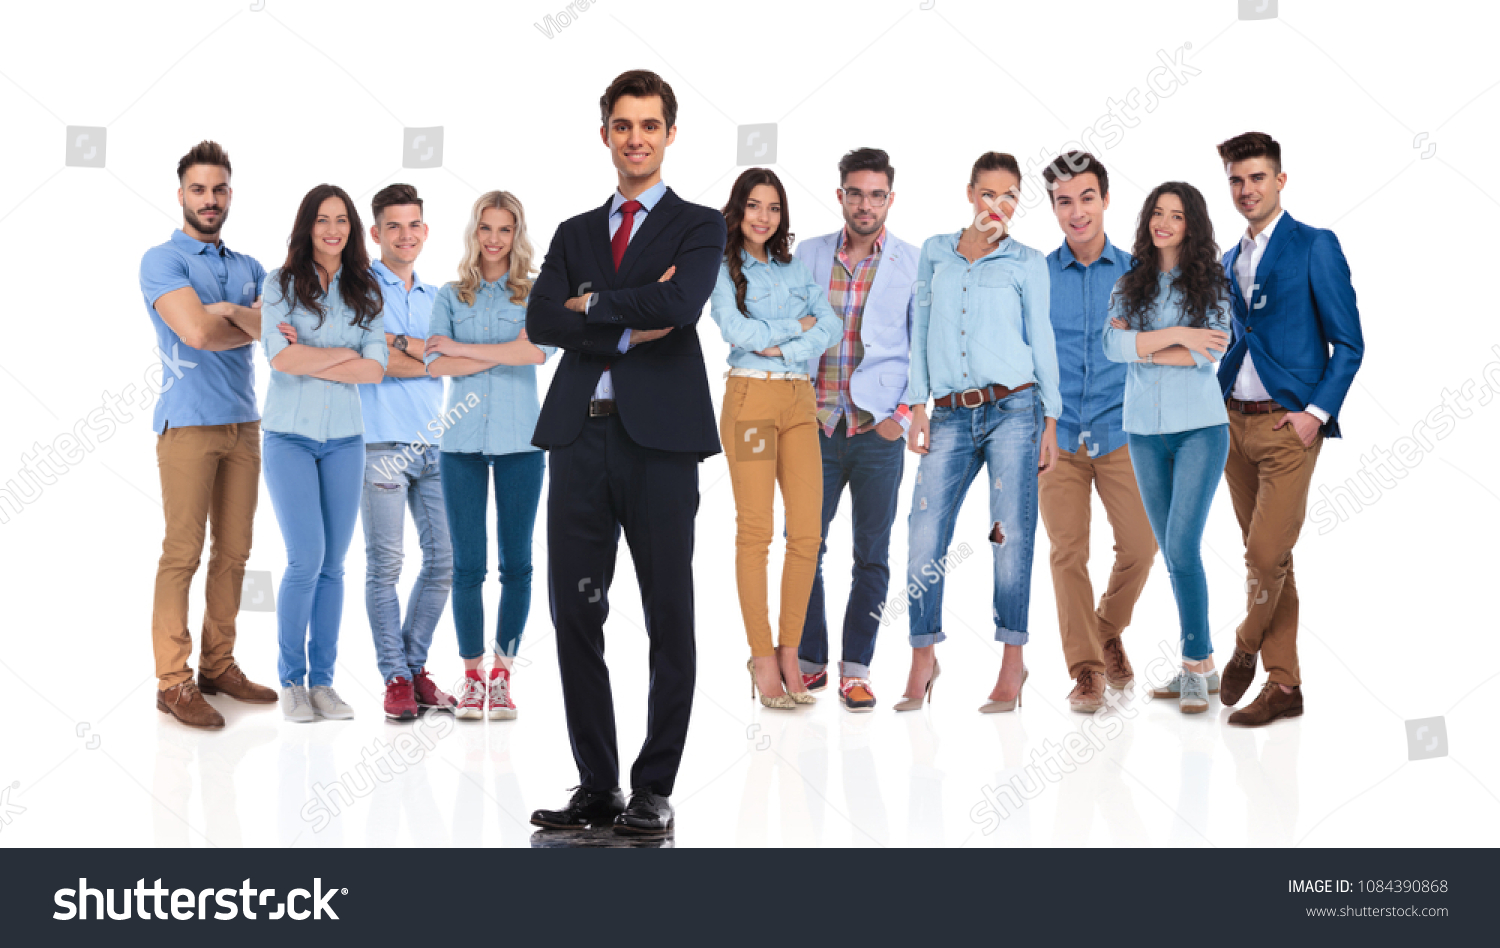 confident group leader standing on white background with hands folded while his casual team is behind him, full body picture #1084390868